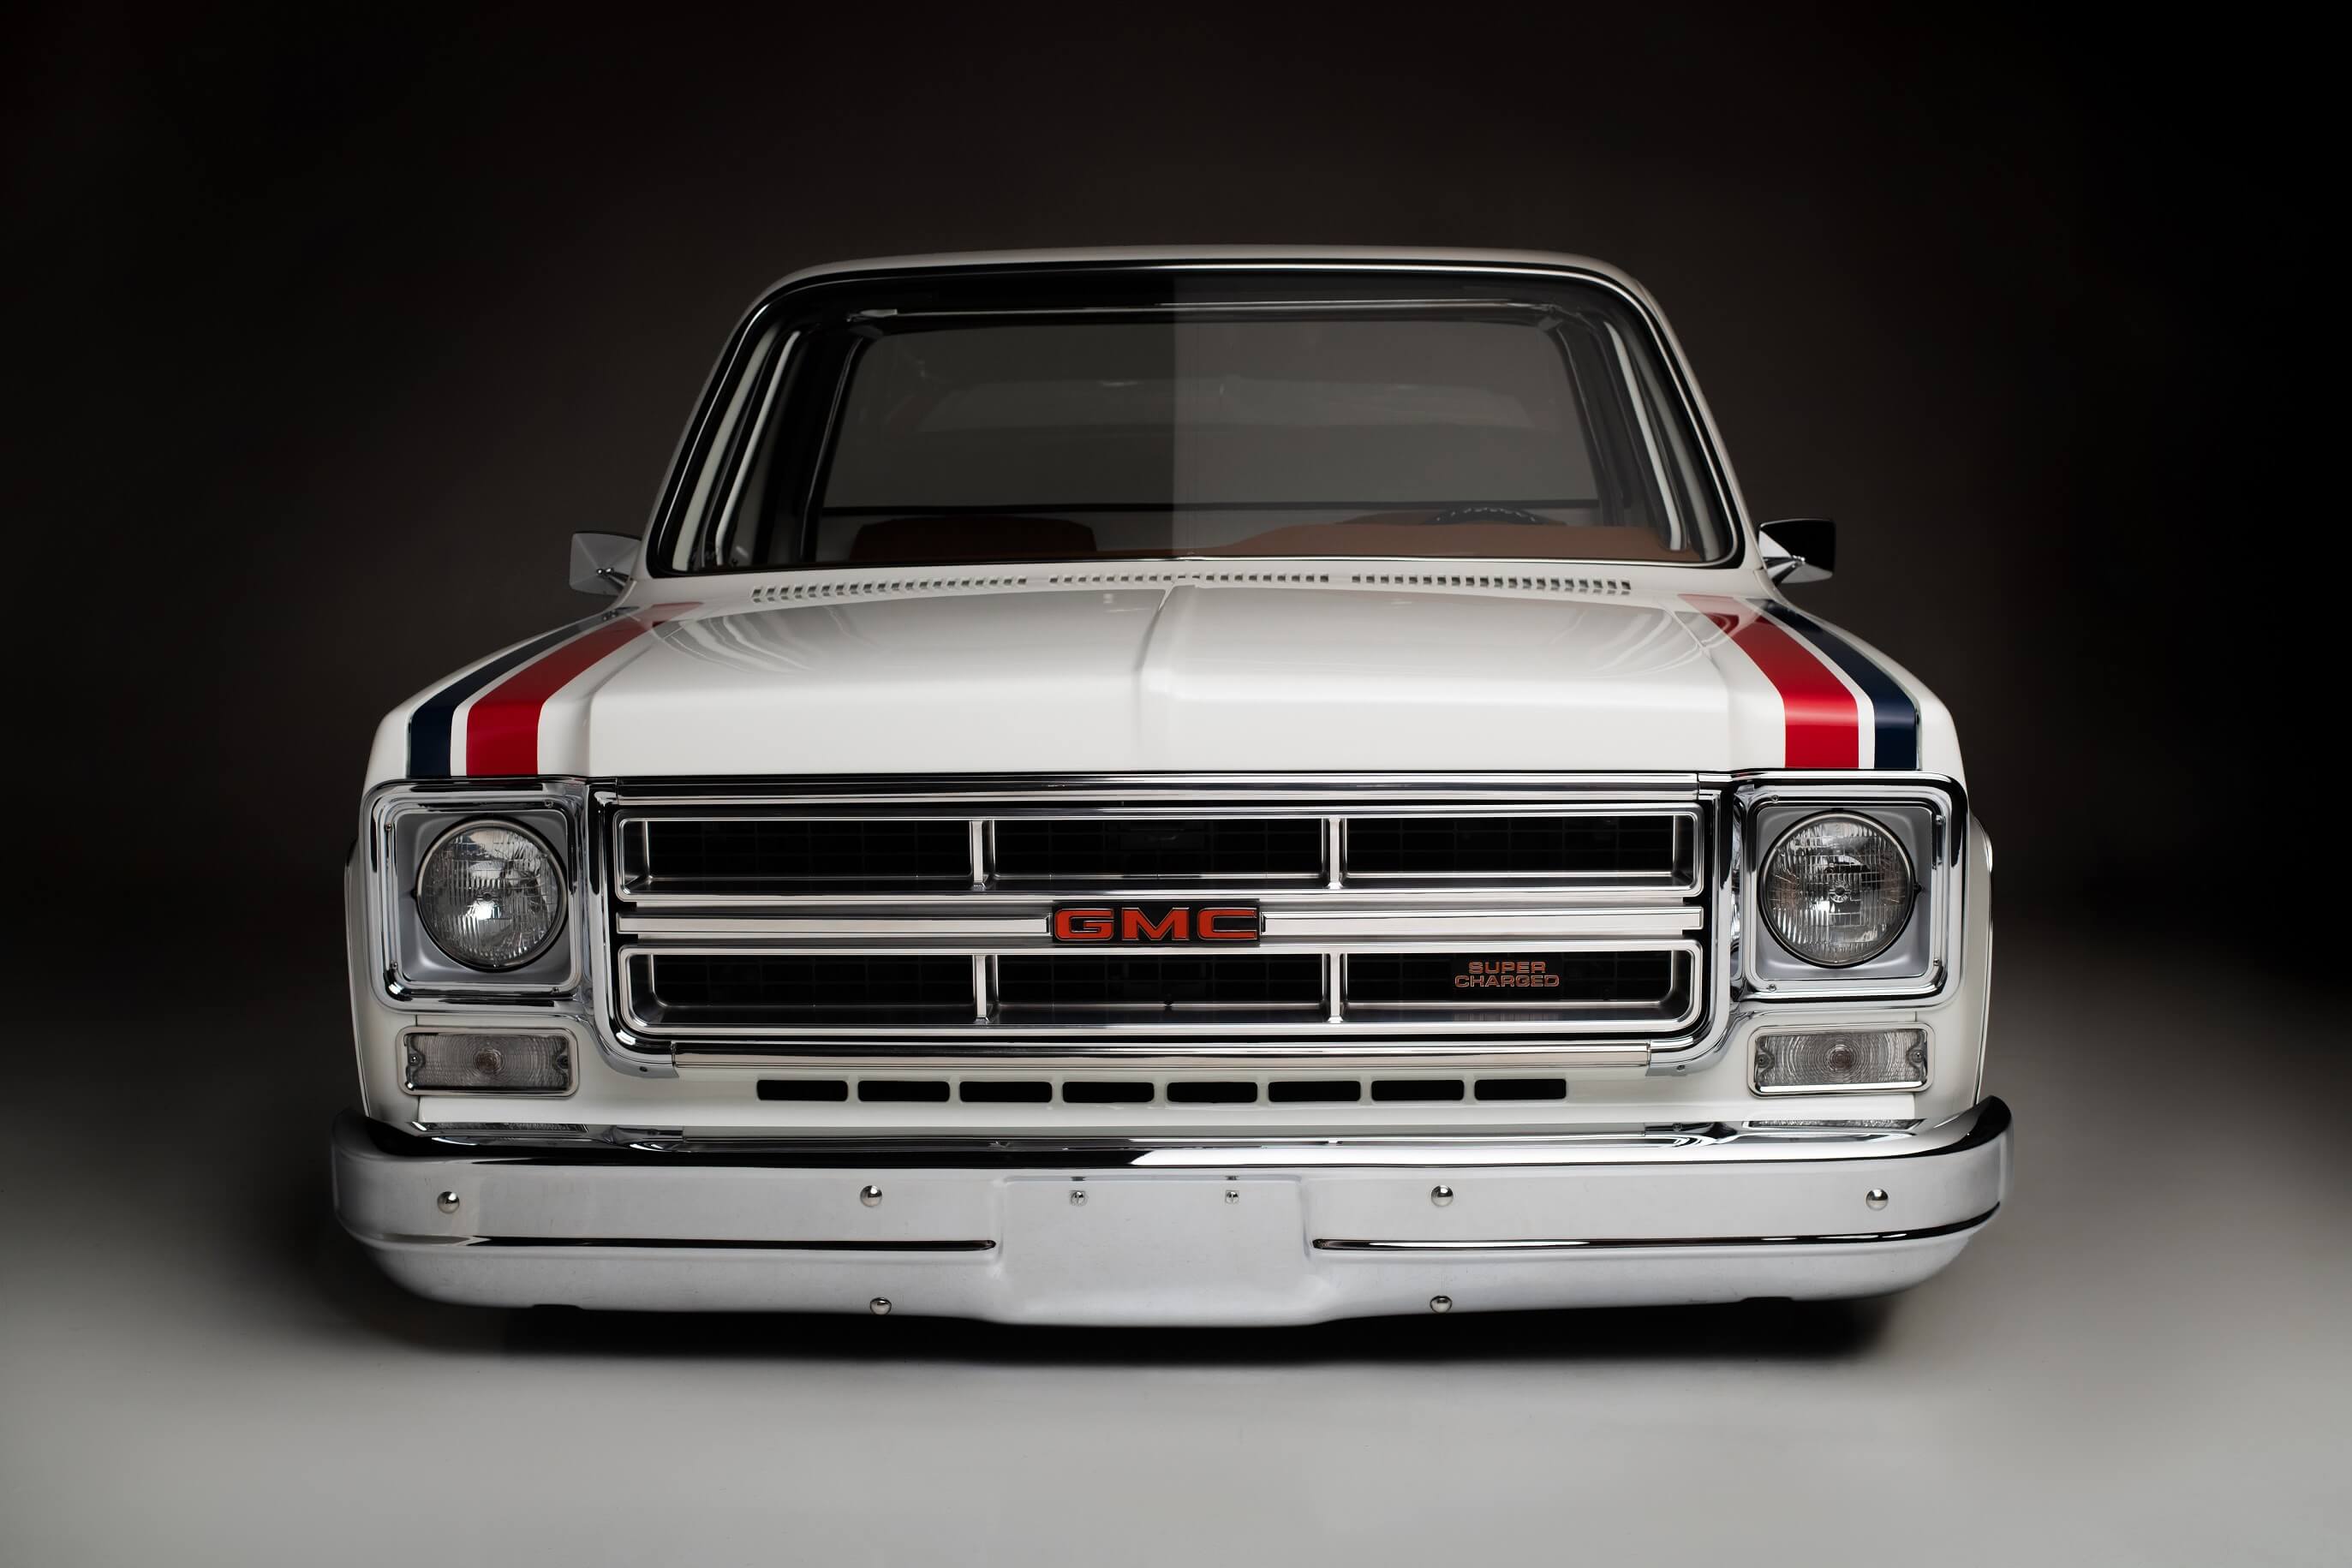 Holley EFI Helps Bring Squarebody Syndicate's 1975 Indy 500 Tribute Truck to Life Motor Life